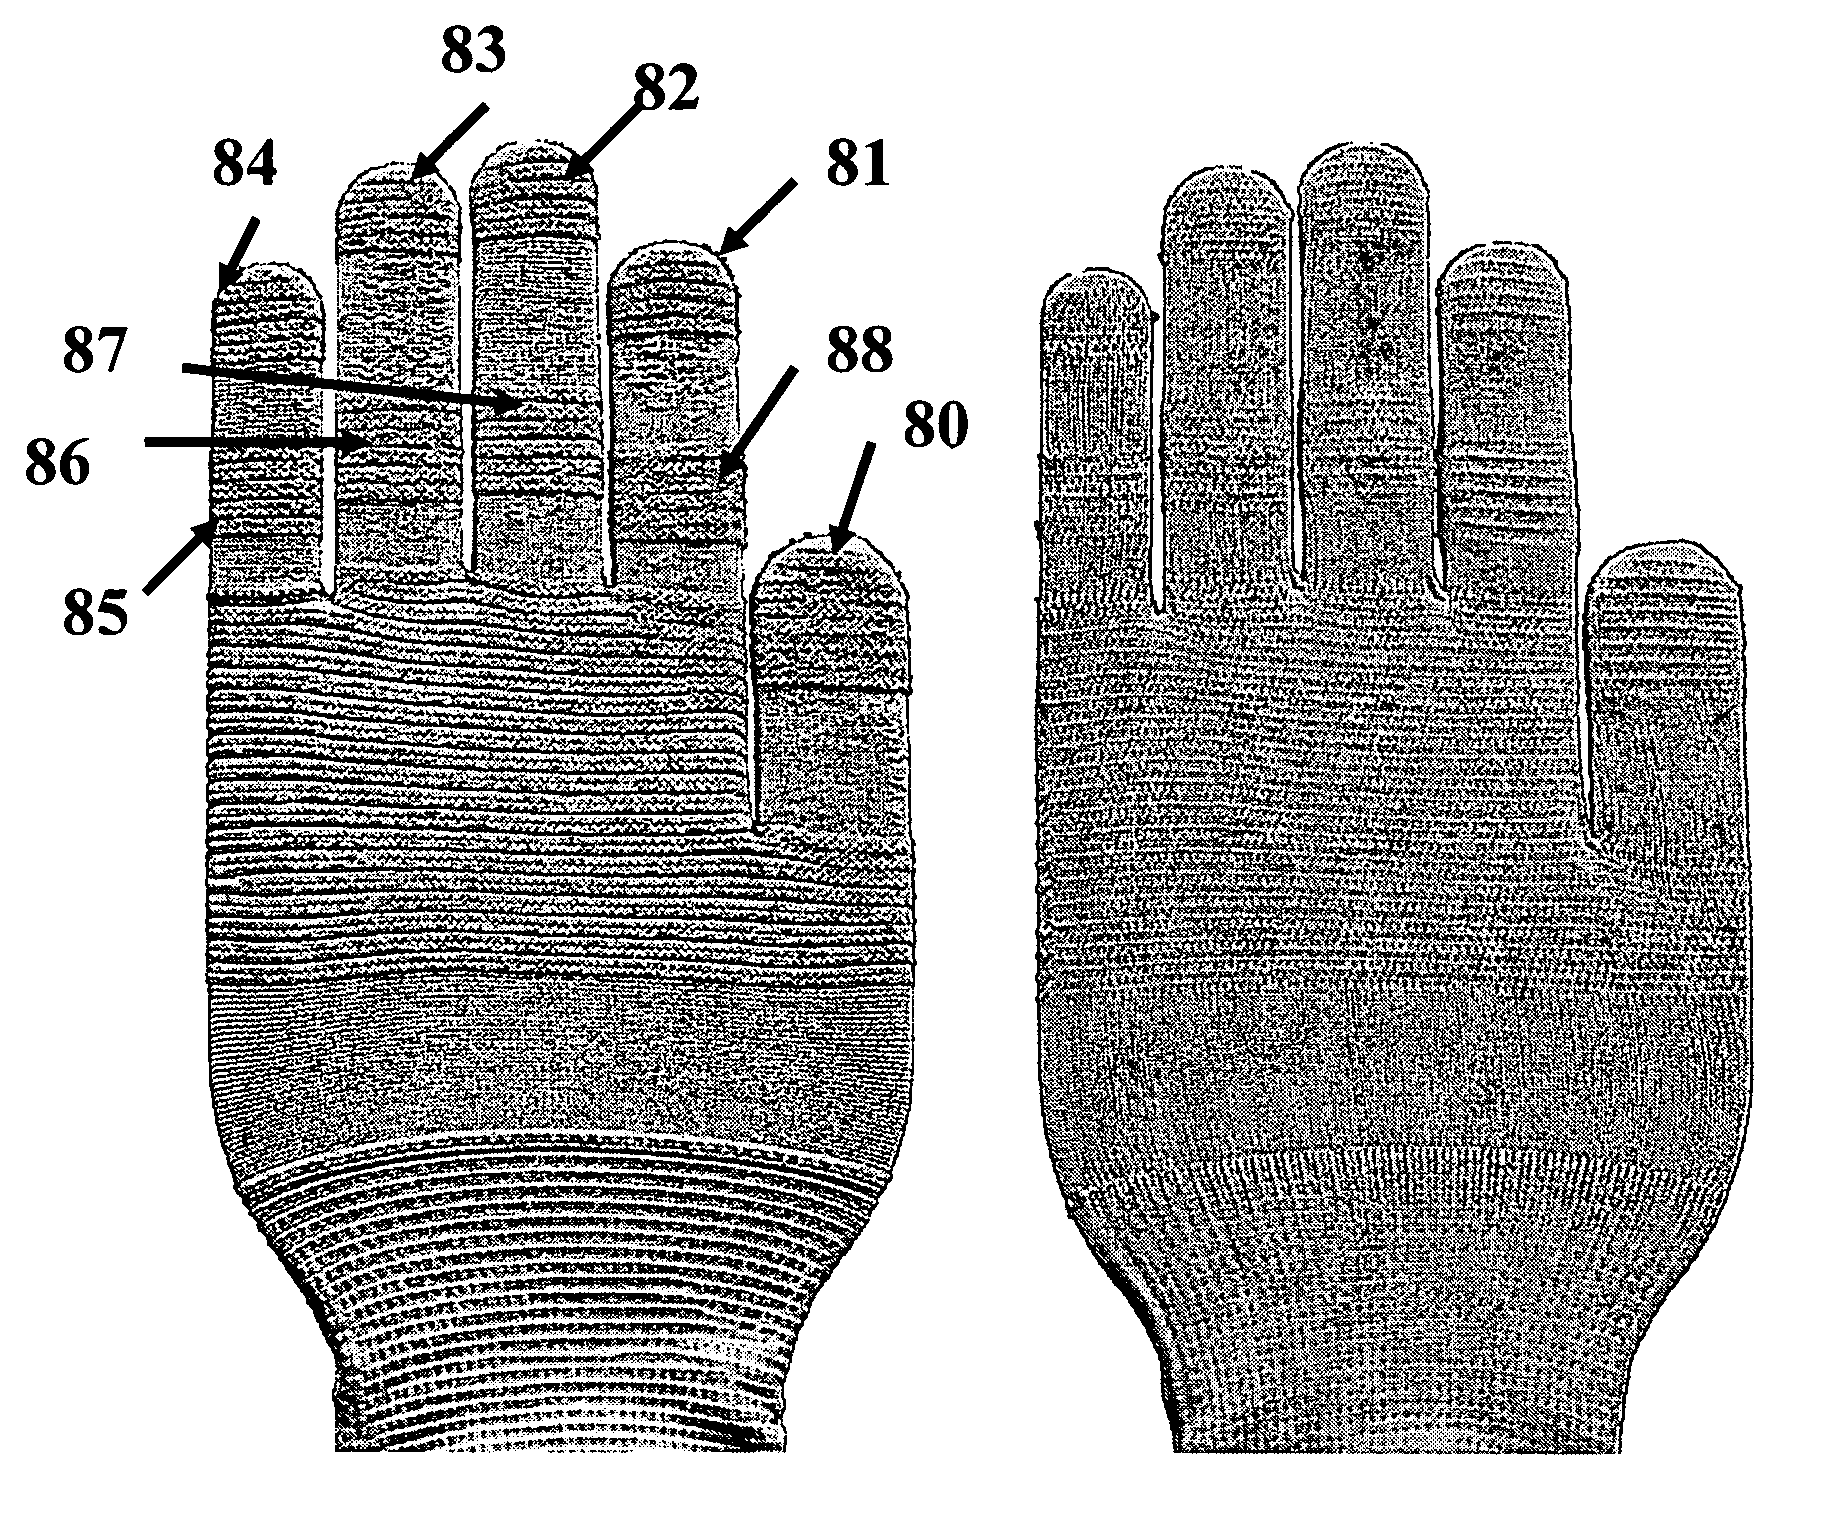 Selective multiple yarn reinforcement of a knitted glove with controlled stitch stretch capability